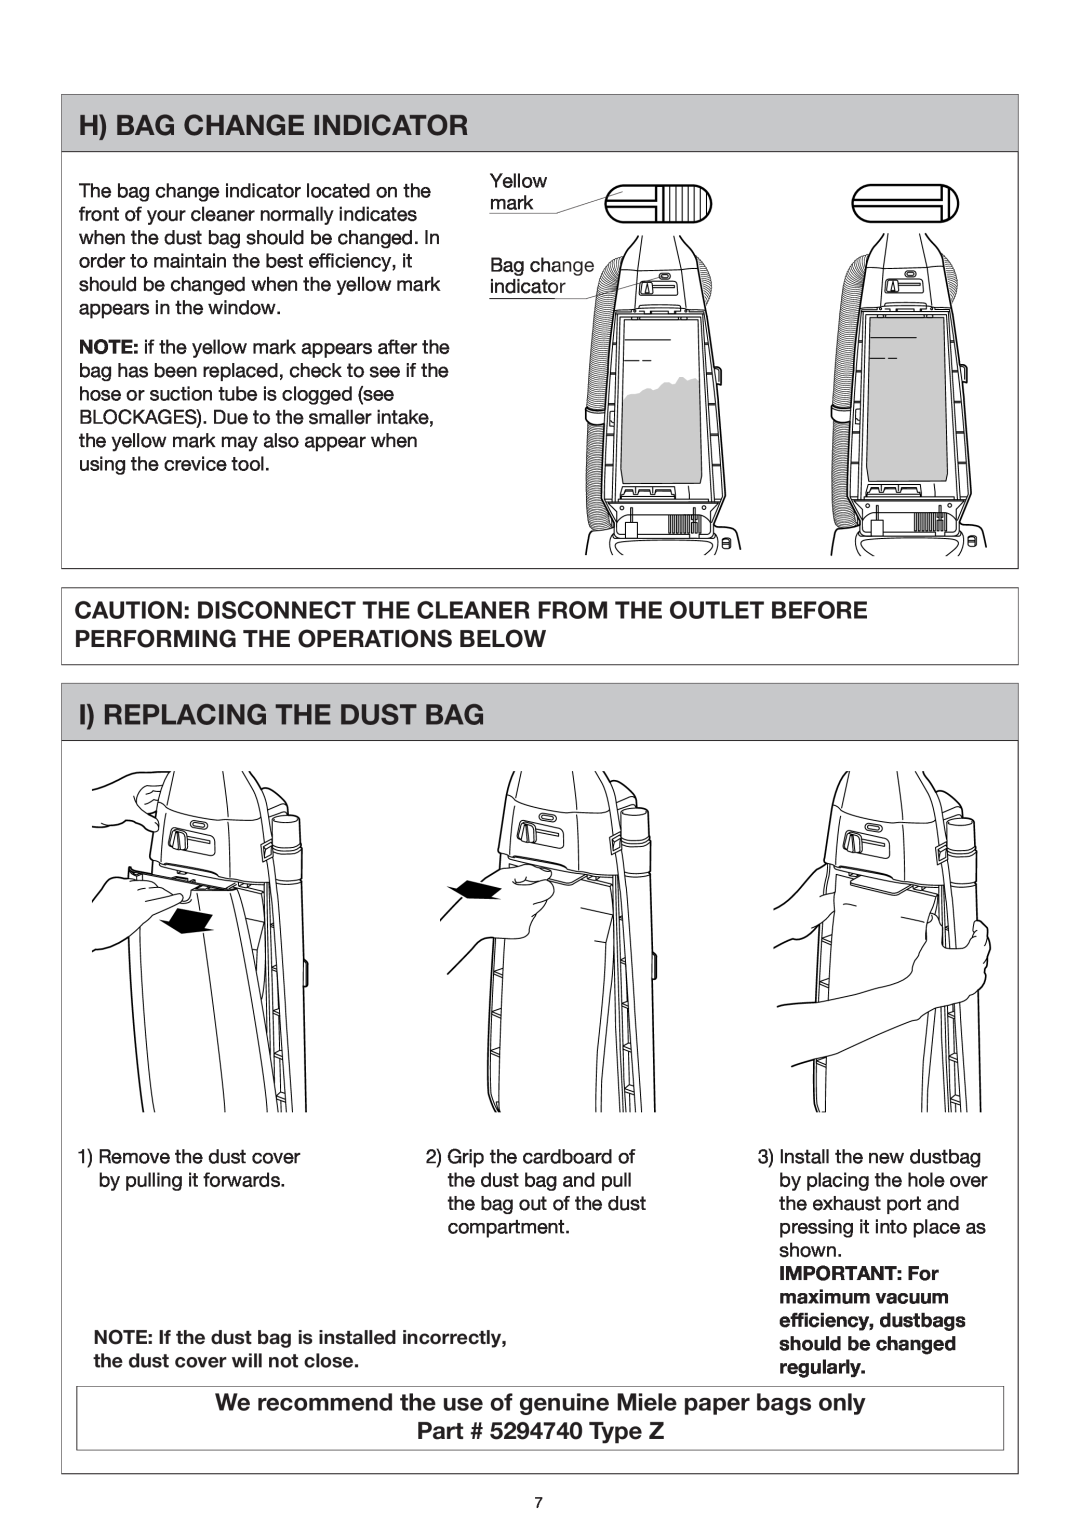 Miele S176i, S177i important safety instructions H Bag Change Indicator, I Replacing The Dust Bag 